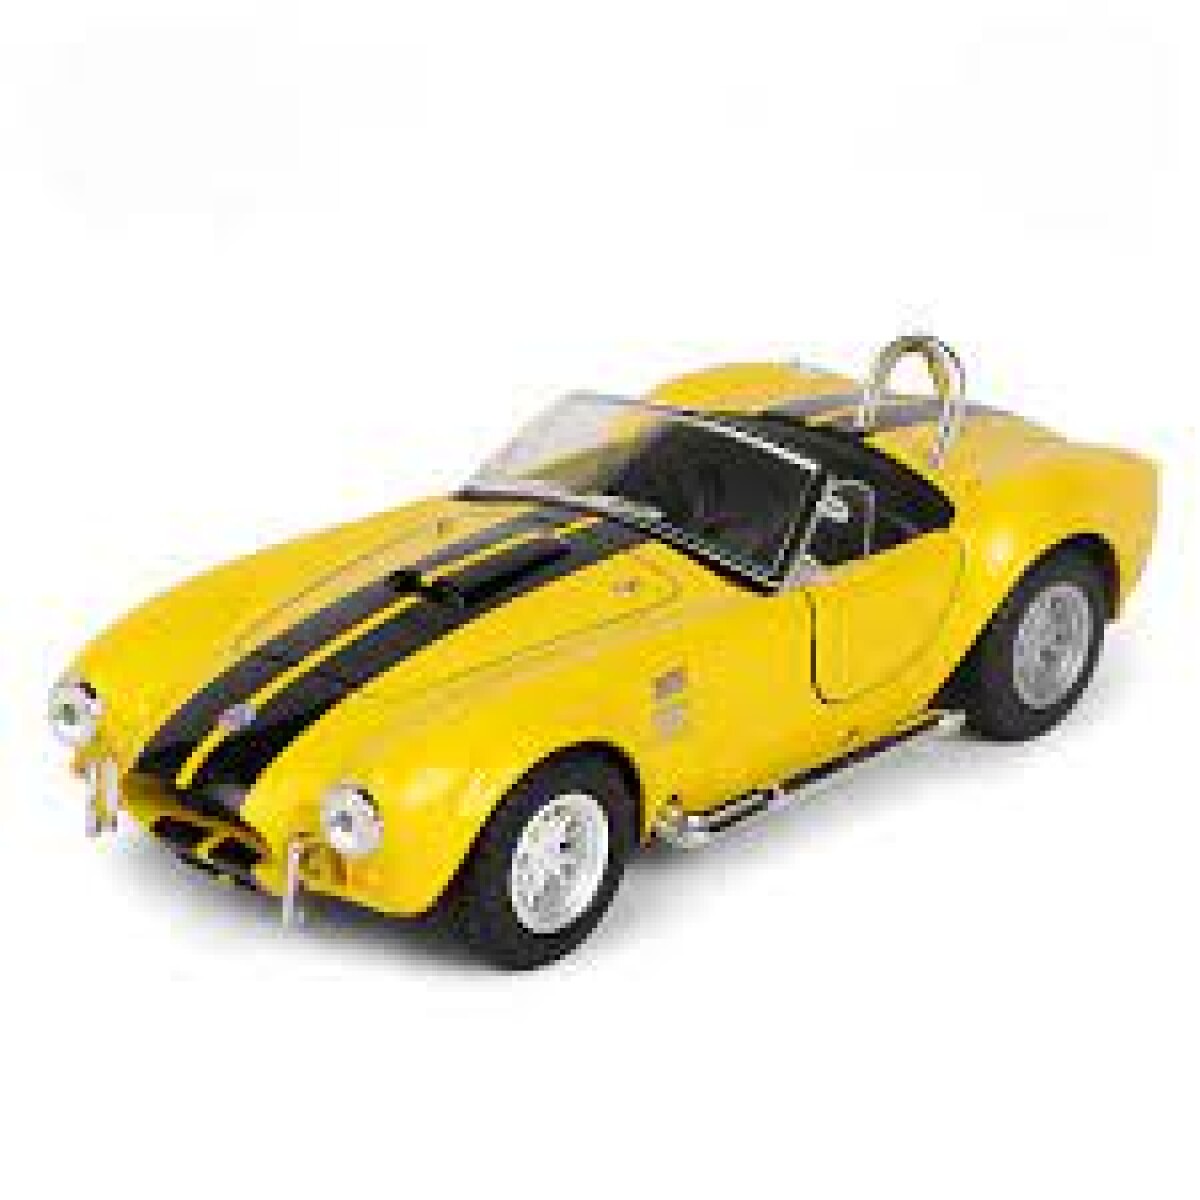 Ford Shelby Cobra 427 S/C 1965 1/32 